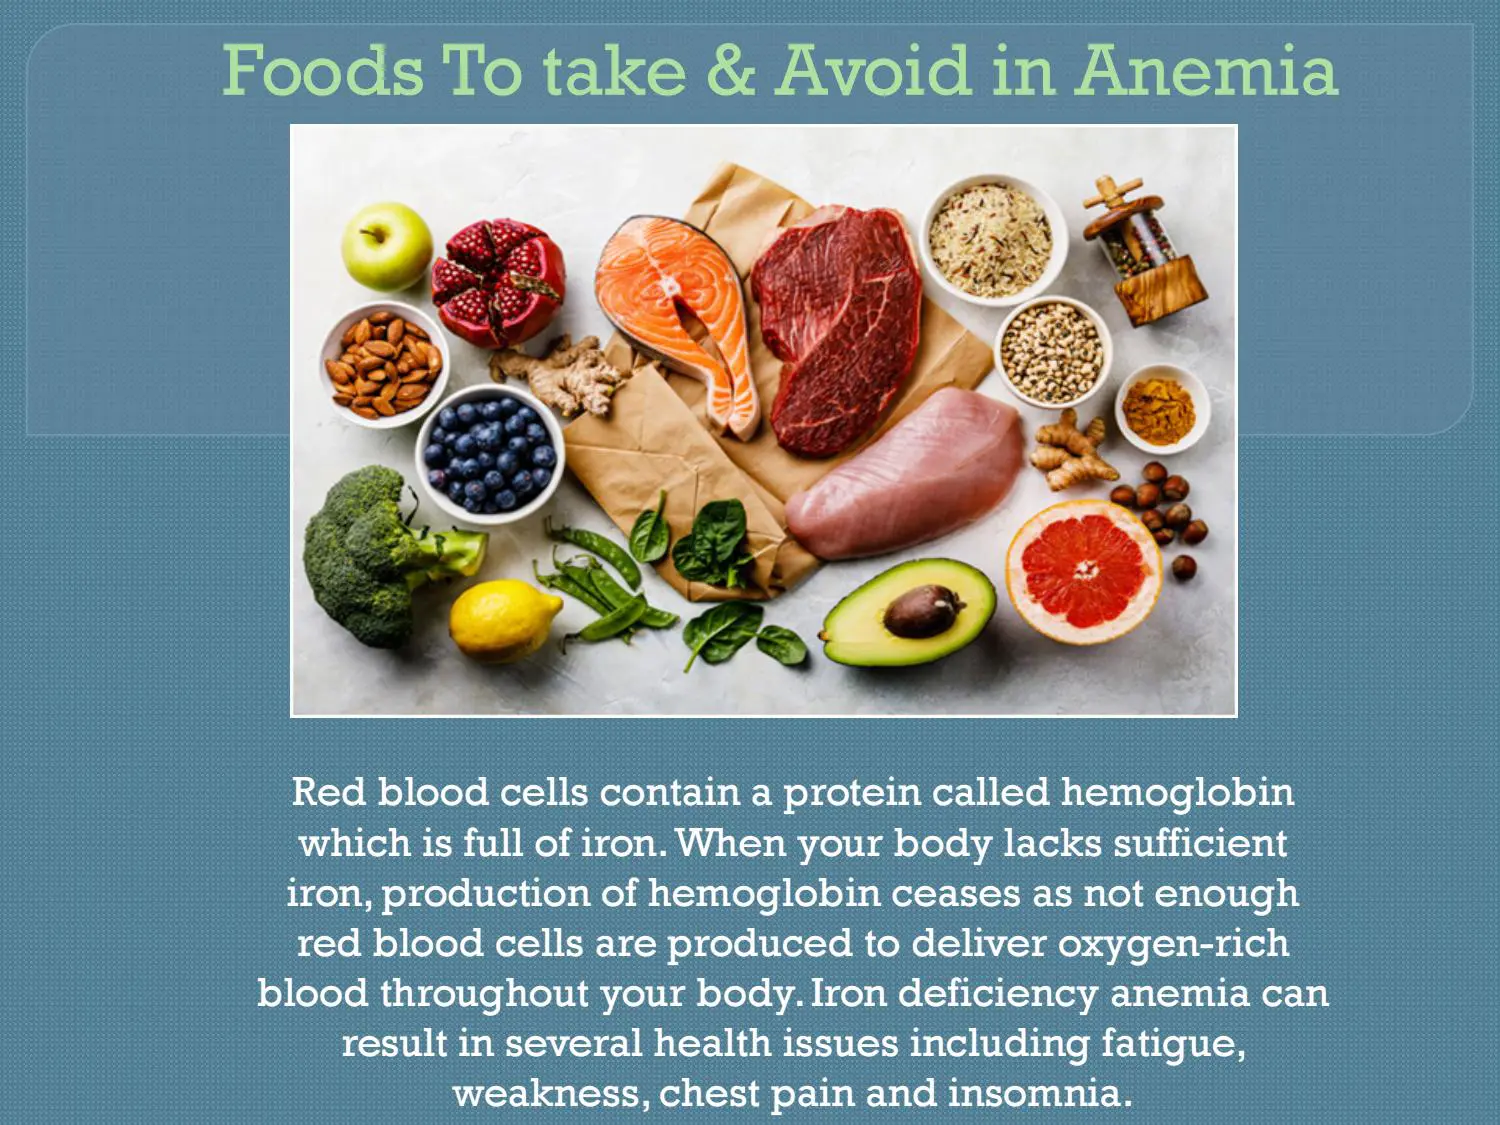 Foods To take & Avoid in Anemia by IronCatch - Issuu